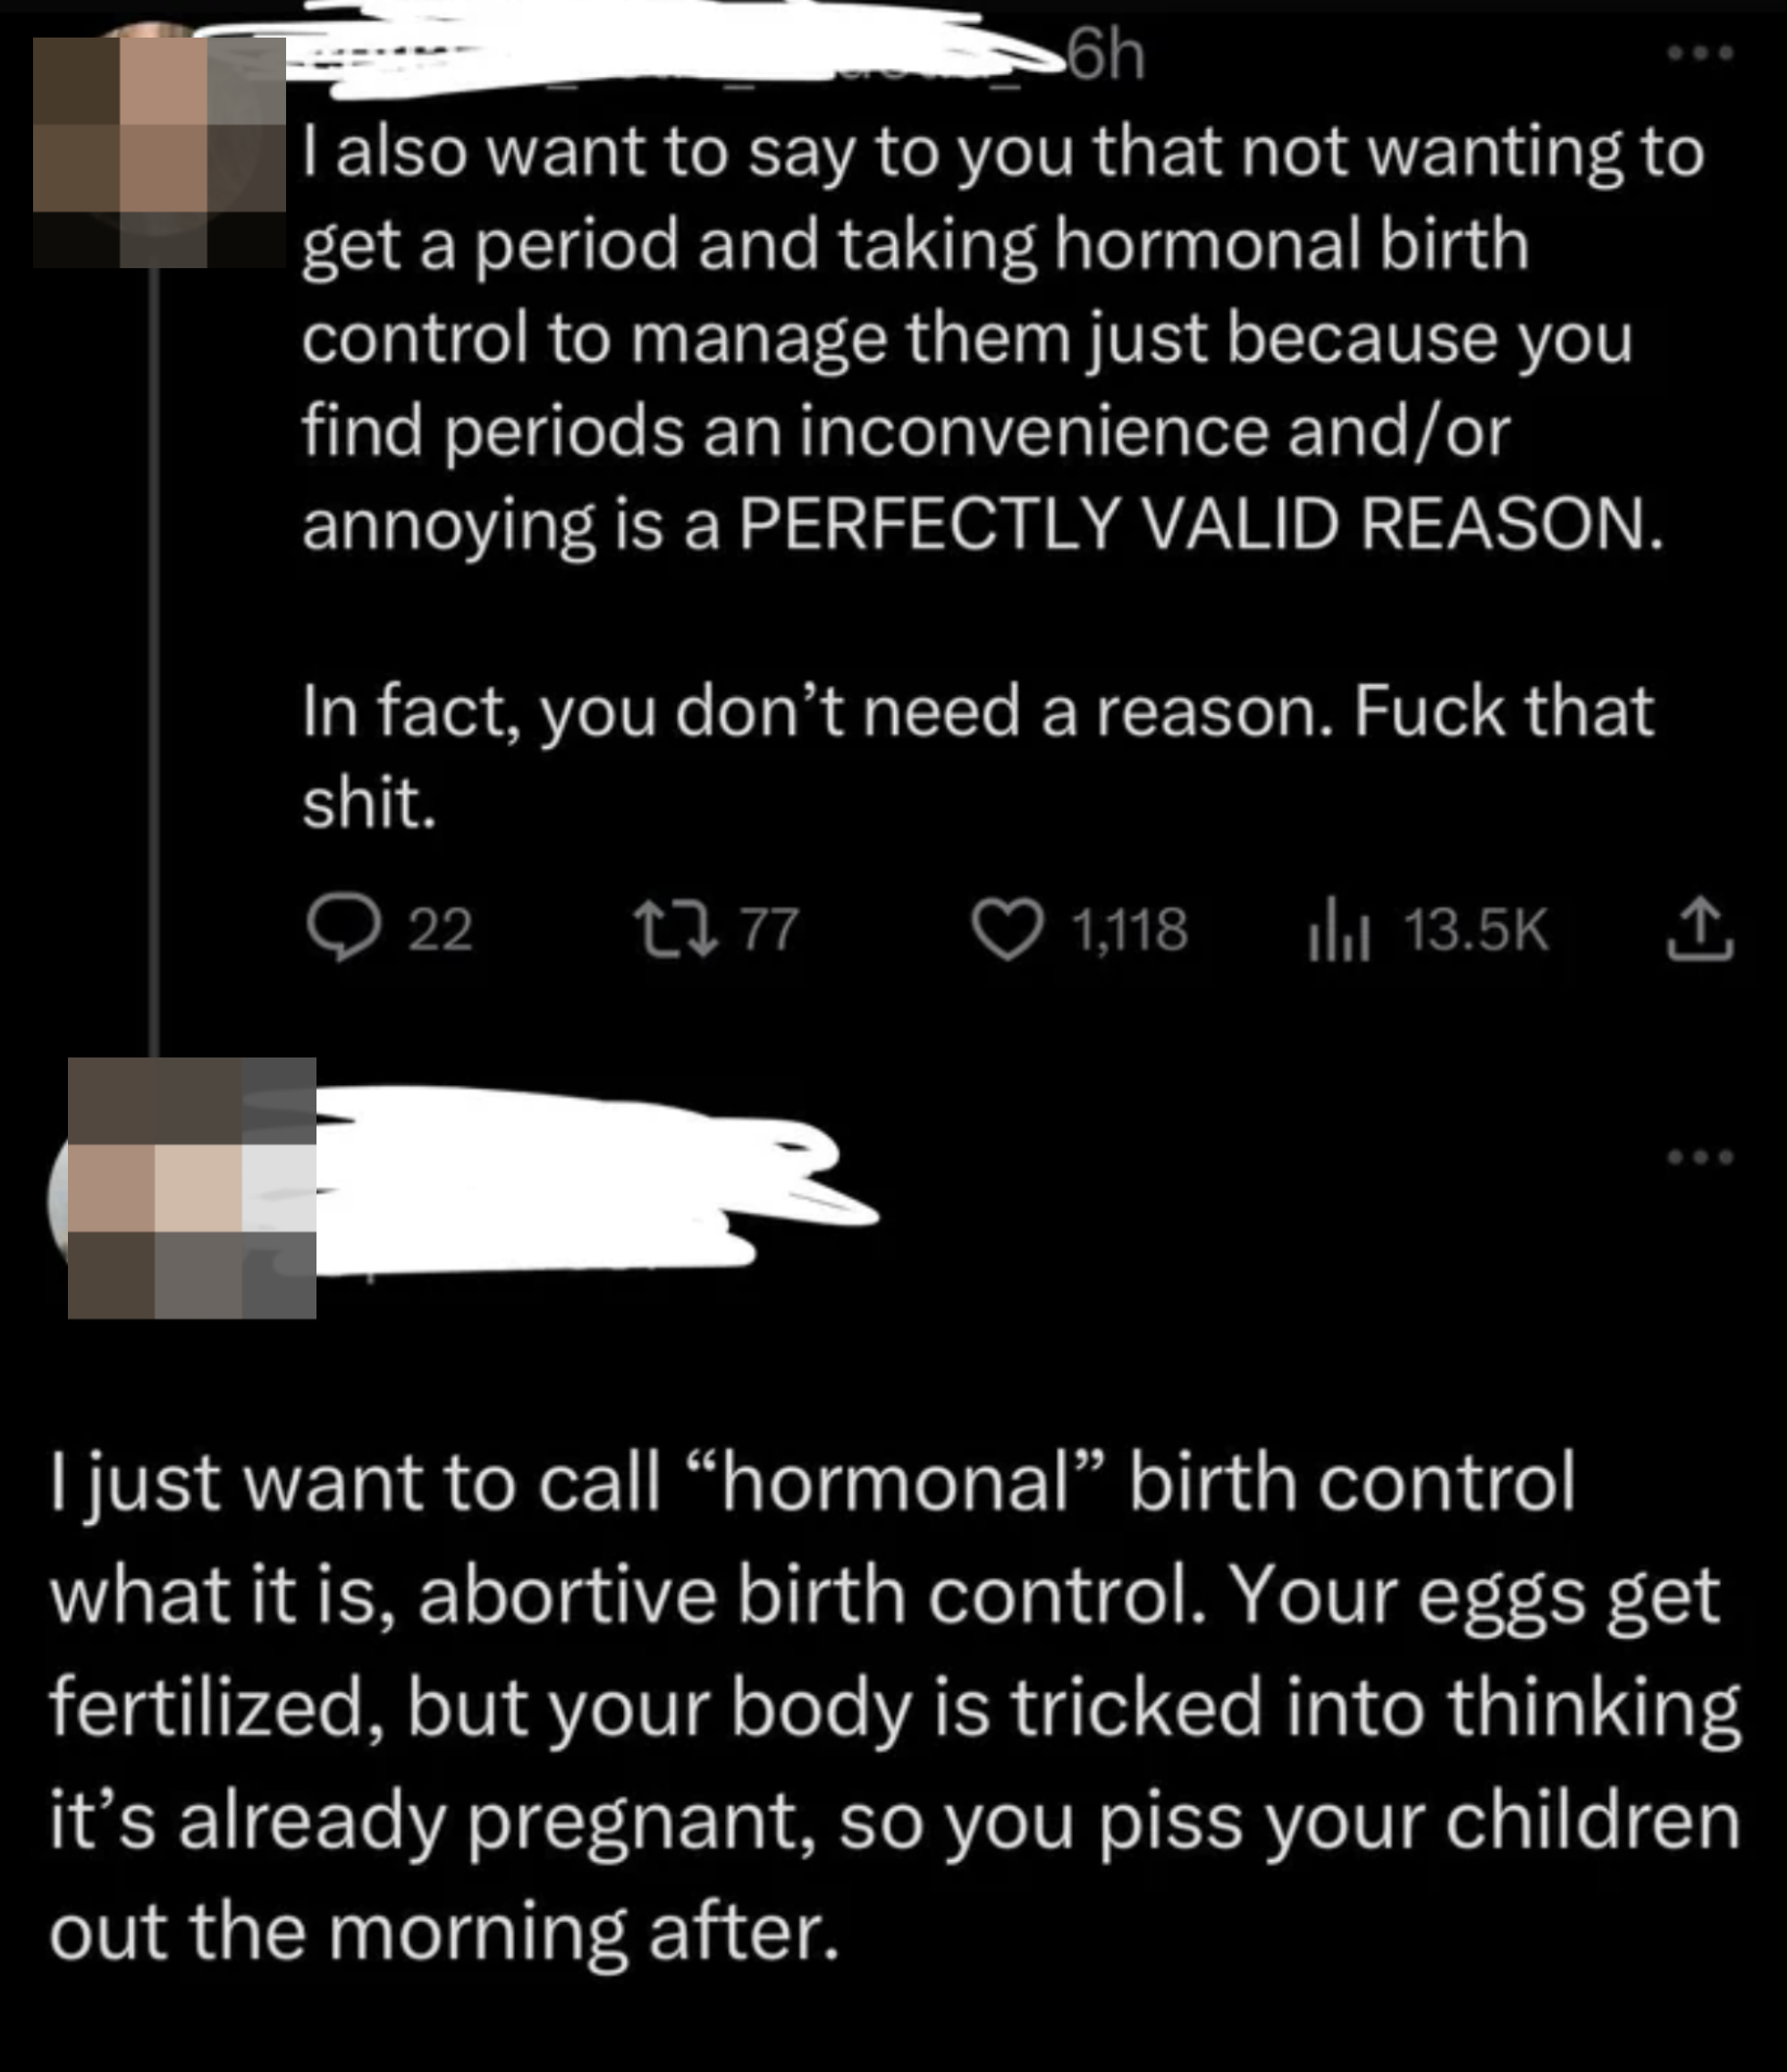 &quot;I just want to call &#x27;hormonal&#x27; birth control what it is, abortive birth control.&quot;